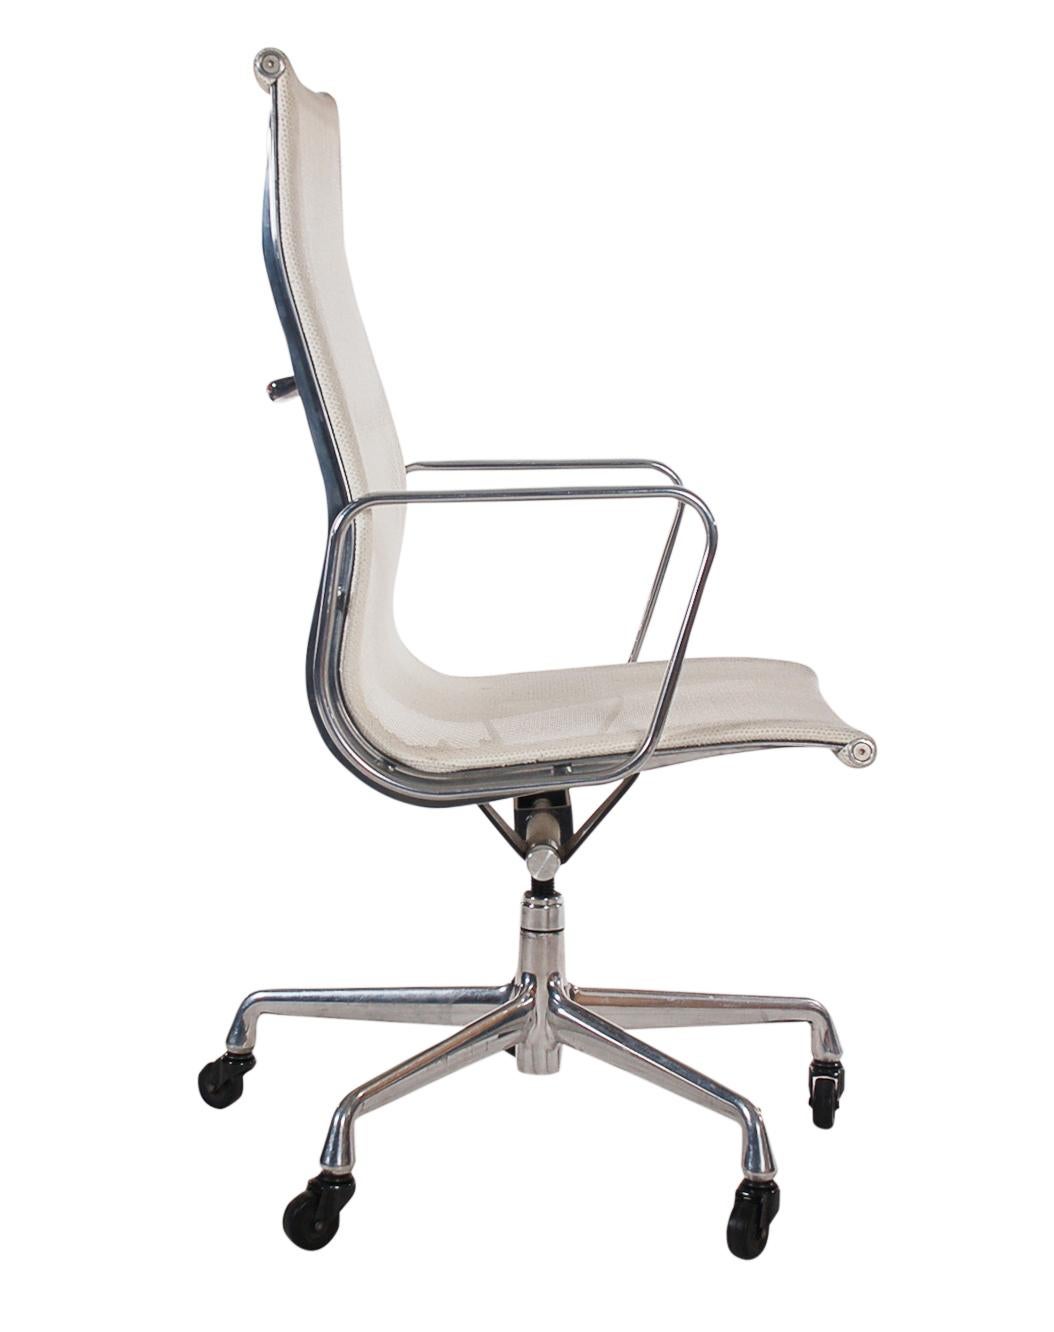 Aluminum Pair of Charles Eames for Herman Miller White Conference Room Office Chairs